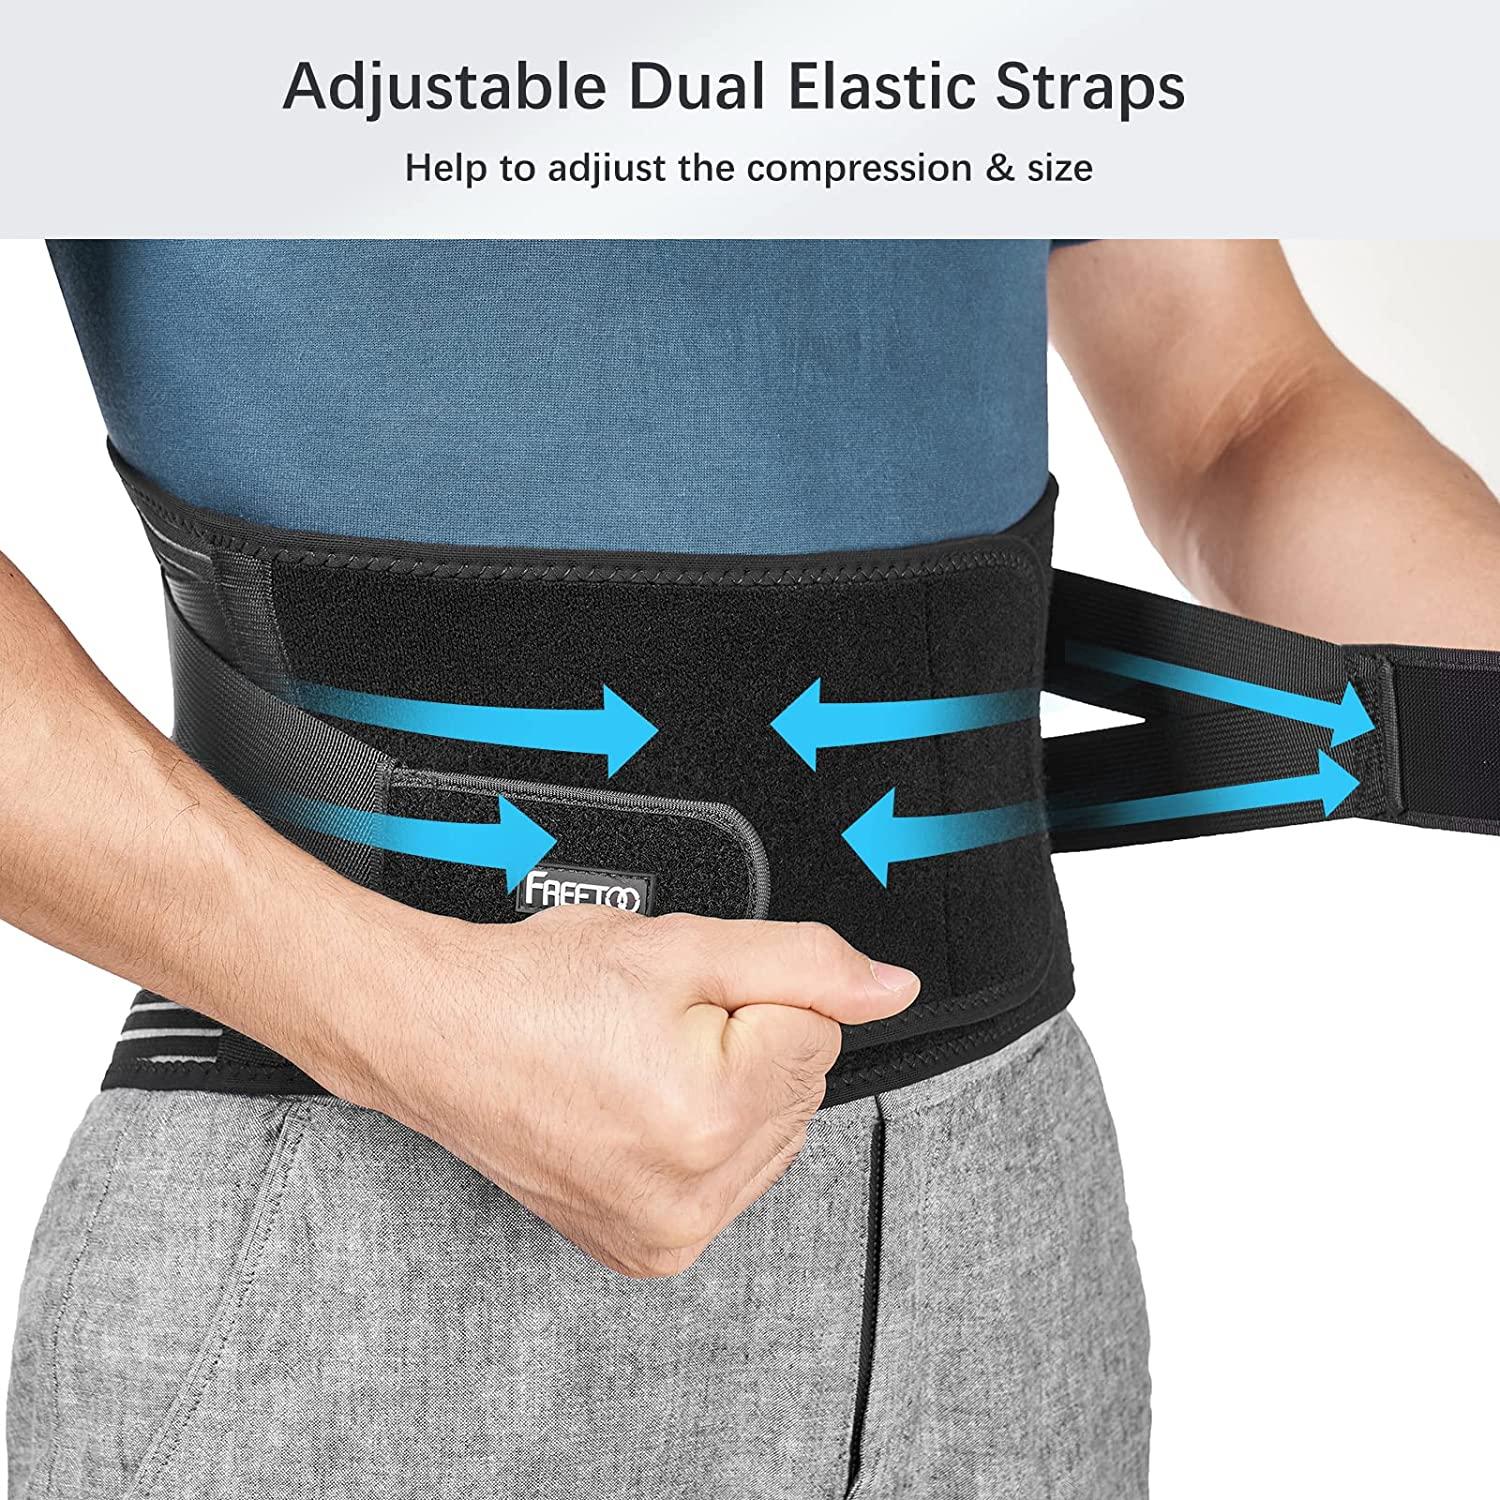 Modvel Back Braces for Lower Back Pain Relief with 6 Stays, Breathable Back Support Belt for Men/Women for Work , Anti-Skid Lumbar Support Belt with